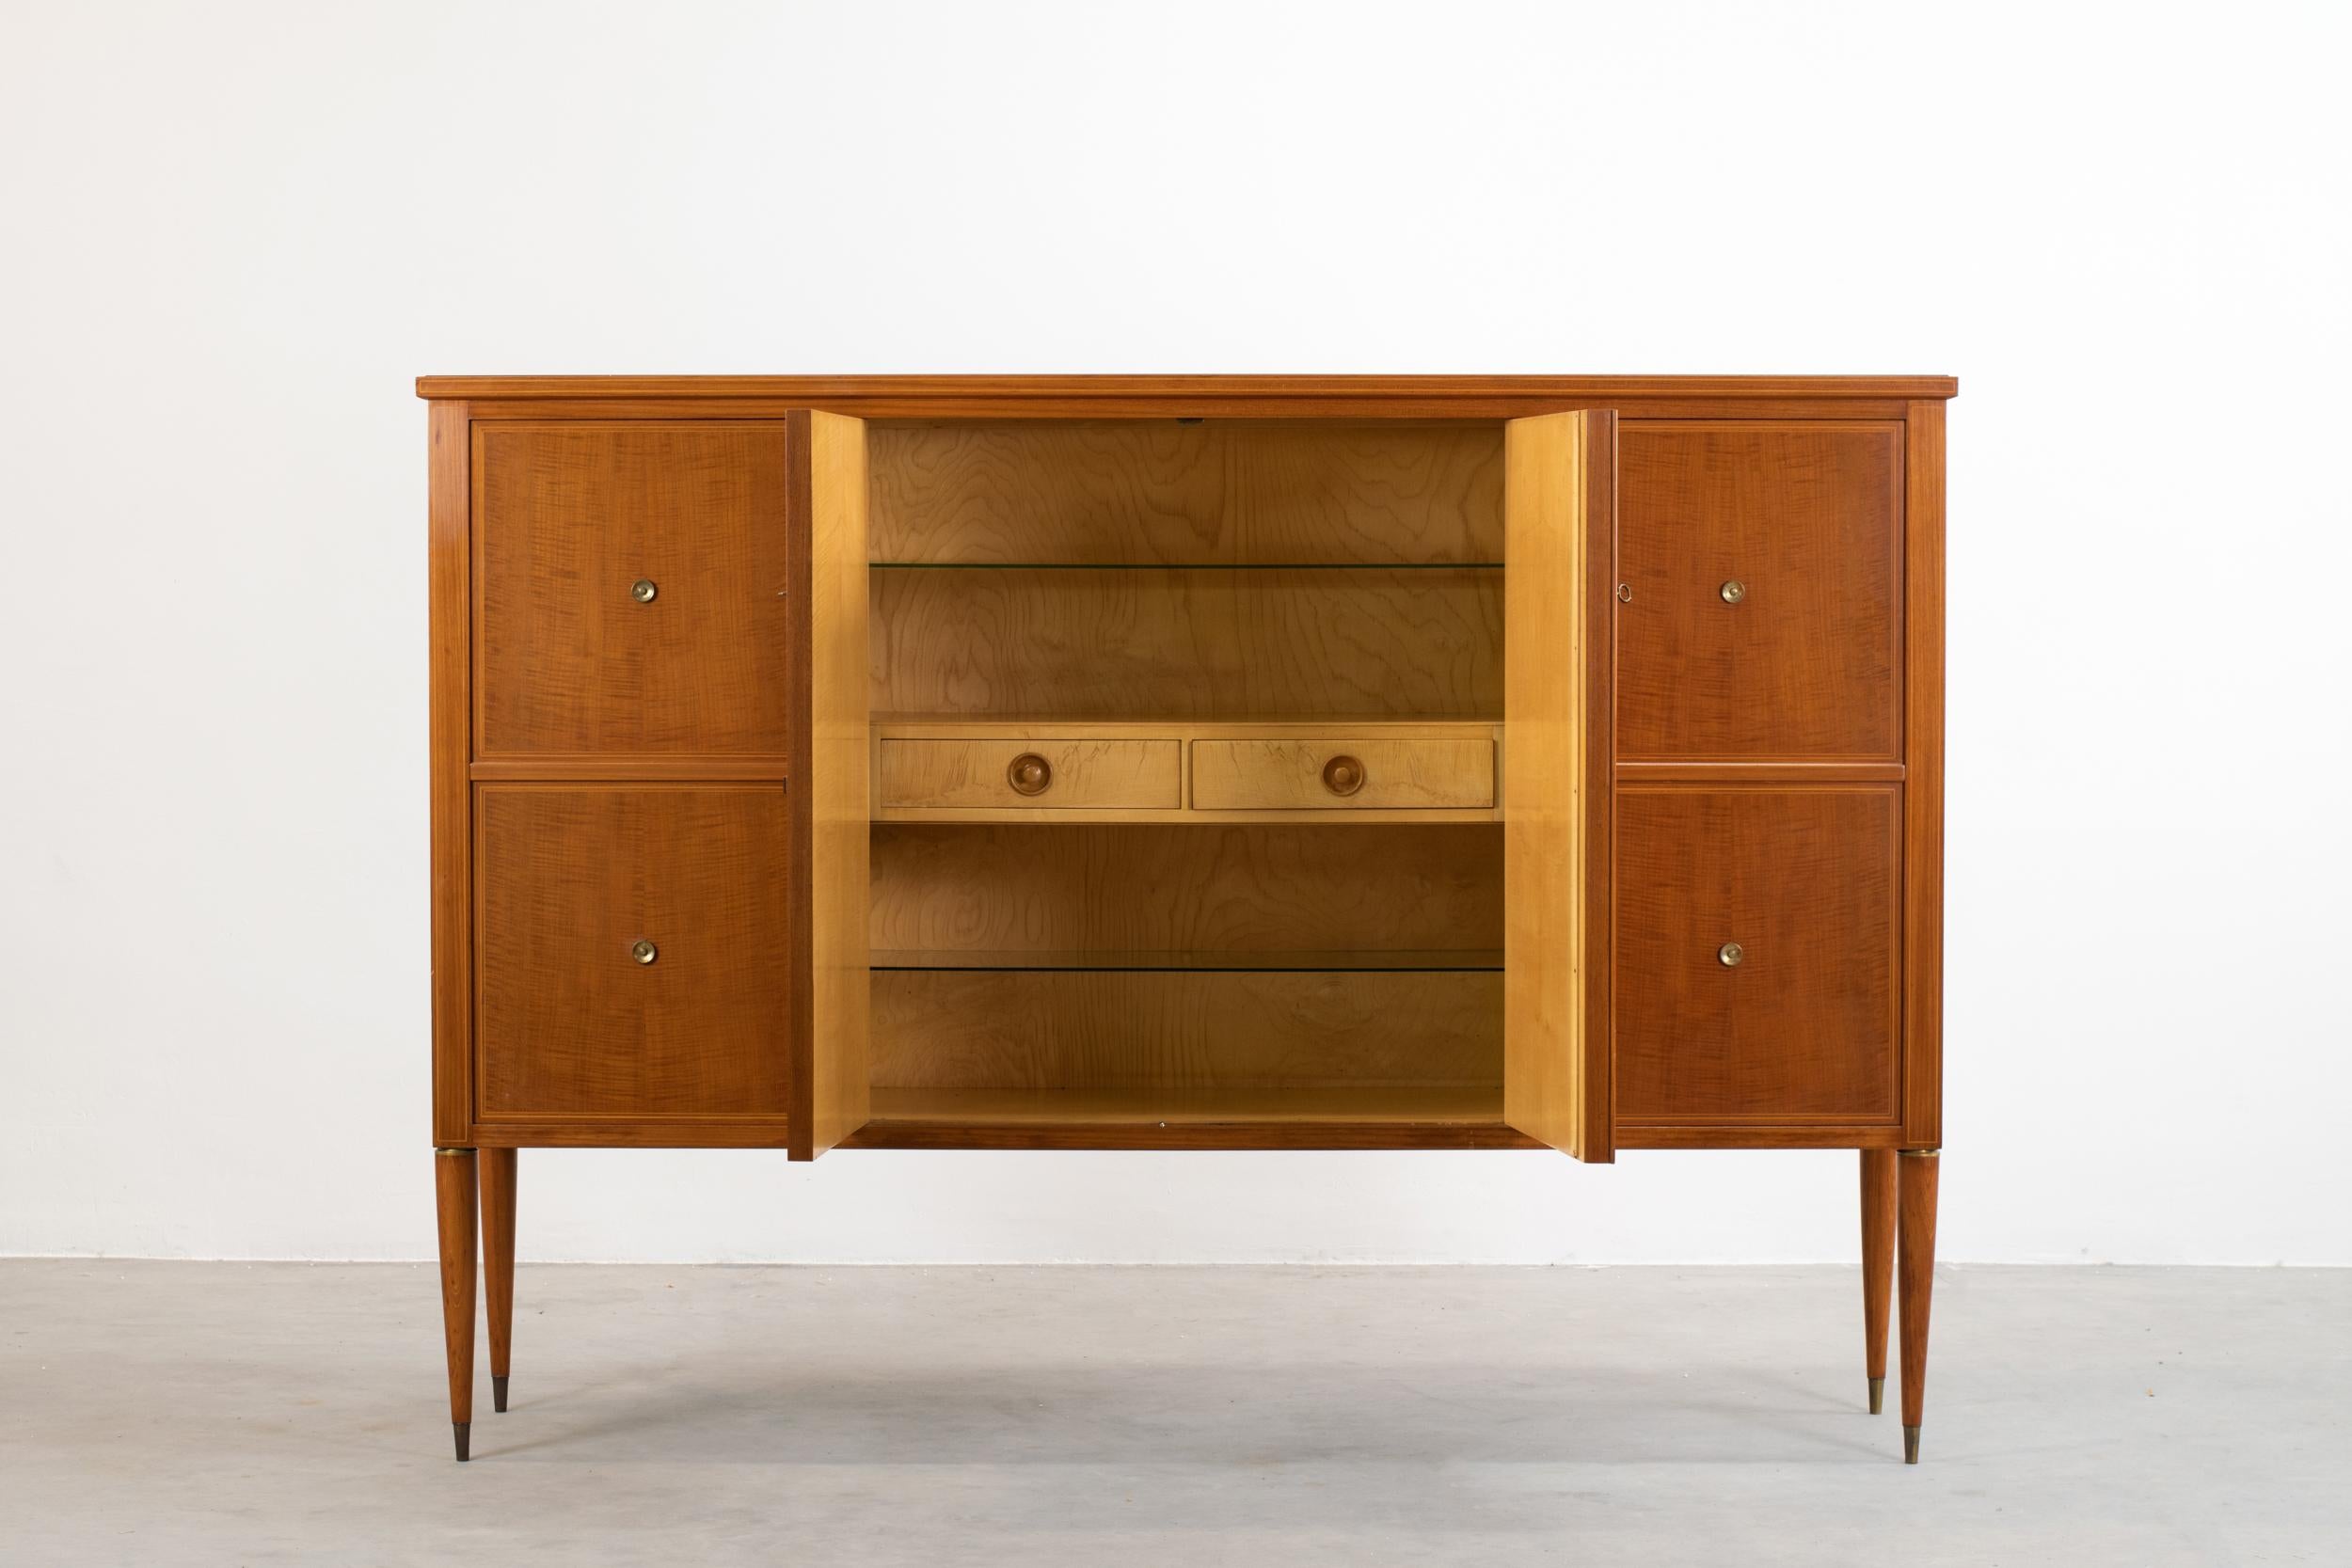 20th-century high rosewood sideboard by Paolo Buffa, in rosewood with brass fixtures, four doors with inner drawers and shelves.
Execution attributed to Serafino Arrighi, 1940s, Italy.
  